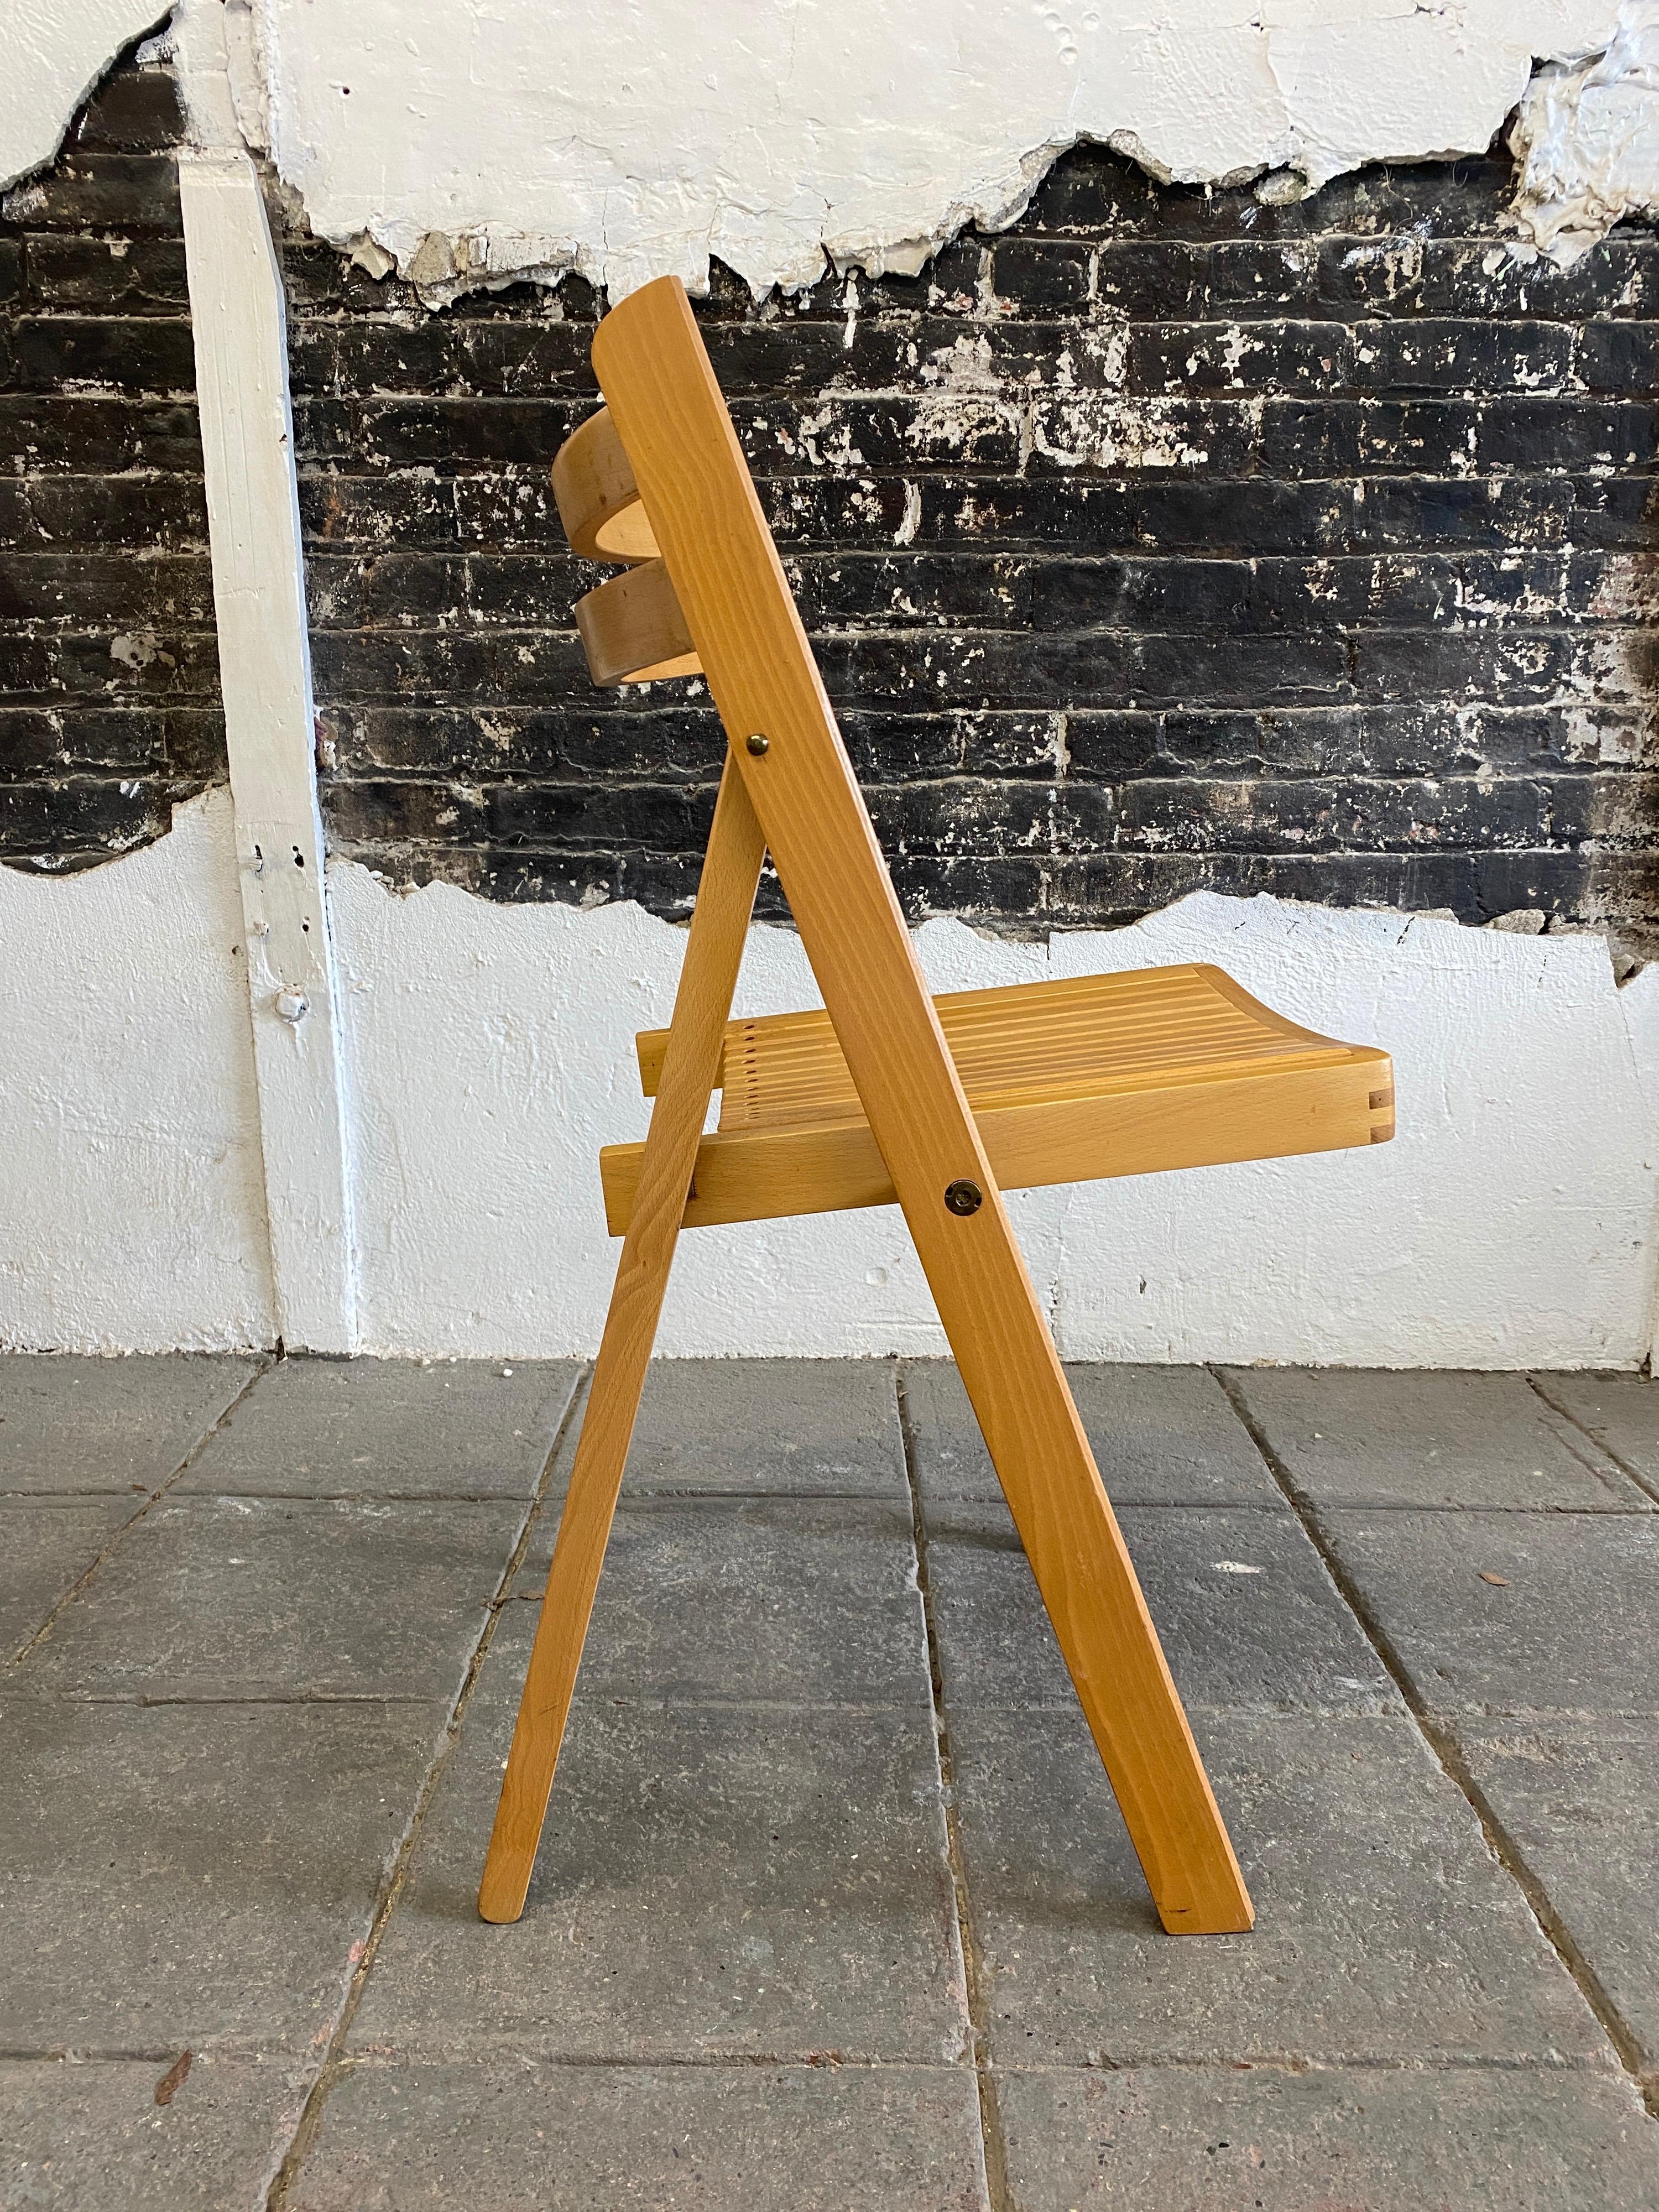 Vintage blonde hardwood slat seat Mid-Century Modern folding patio event dining game restaurant cafe chairs. Each Chair features wood slat seat, folding chair, solid hardwood construction, beautiful wood grain, very nice vintage condition. Circa